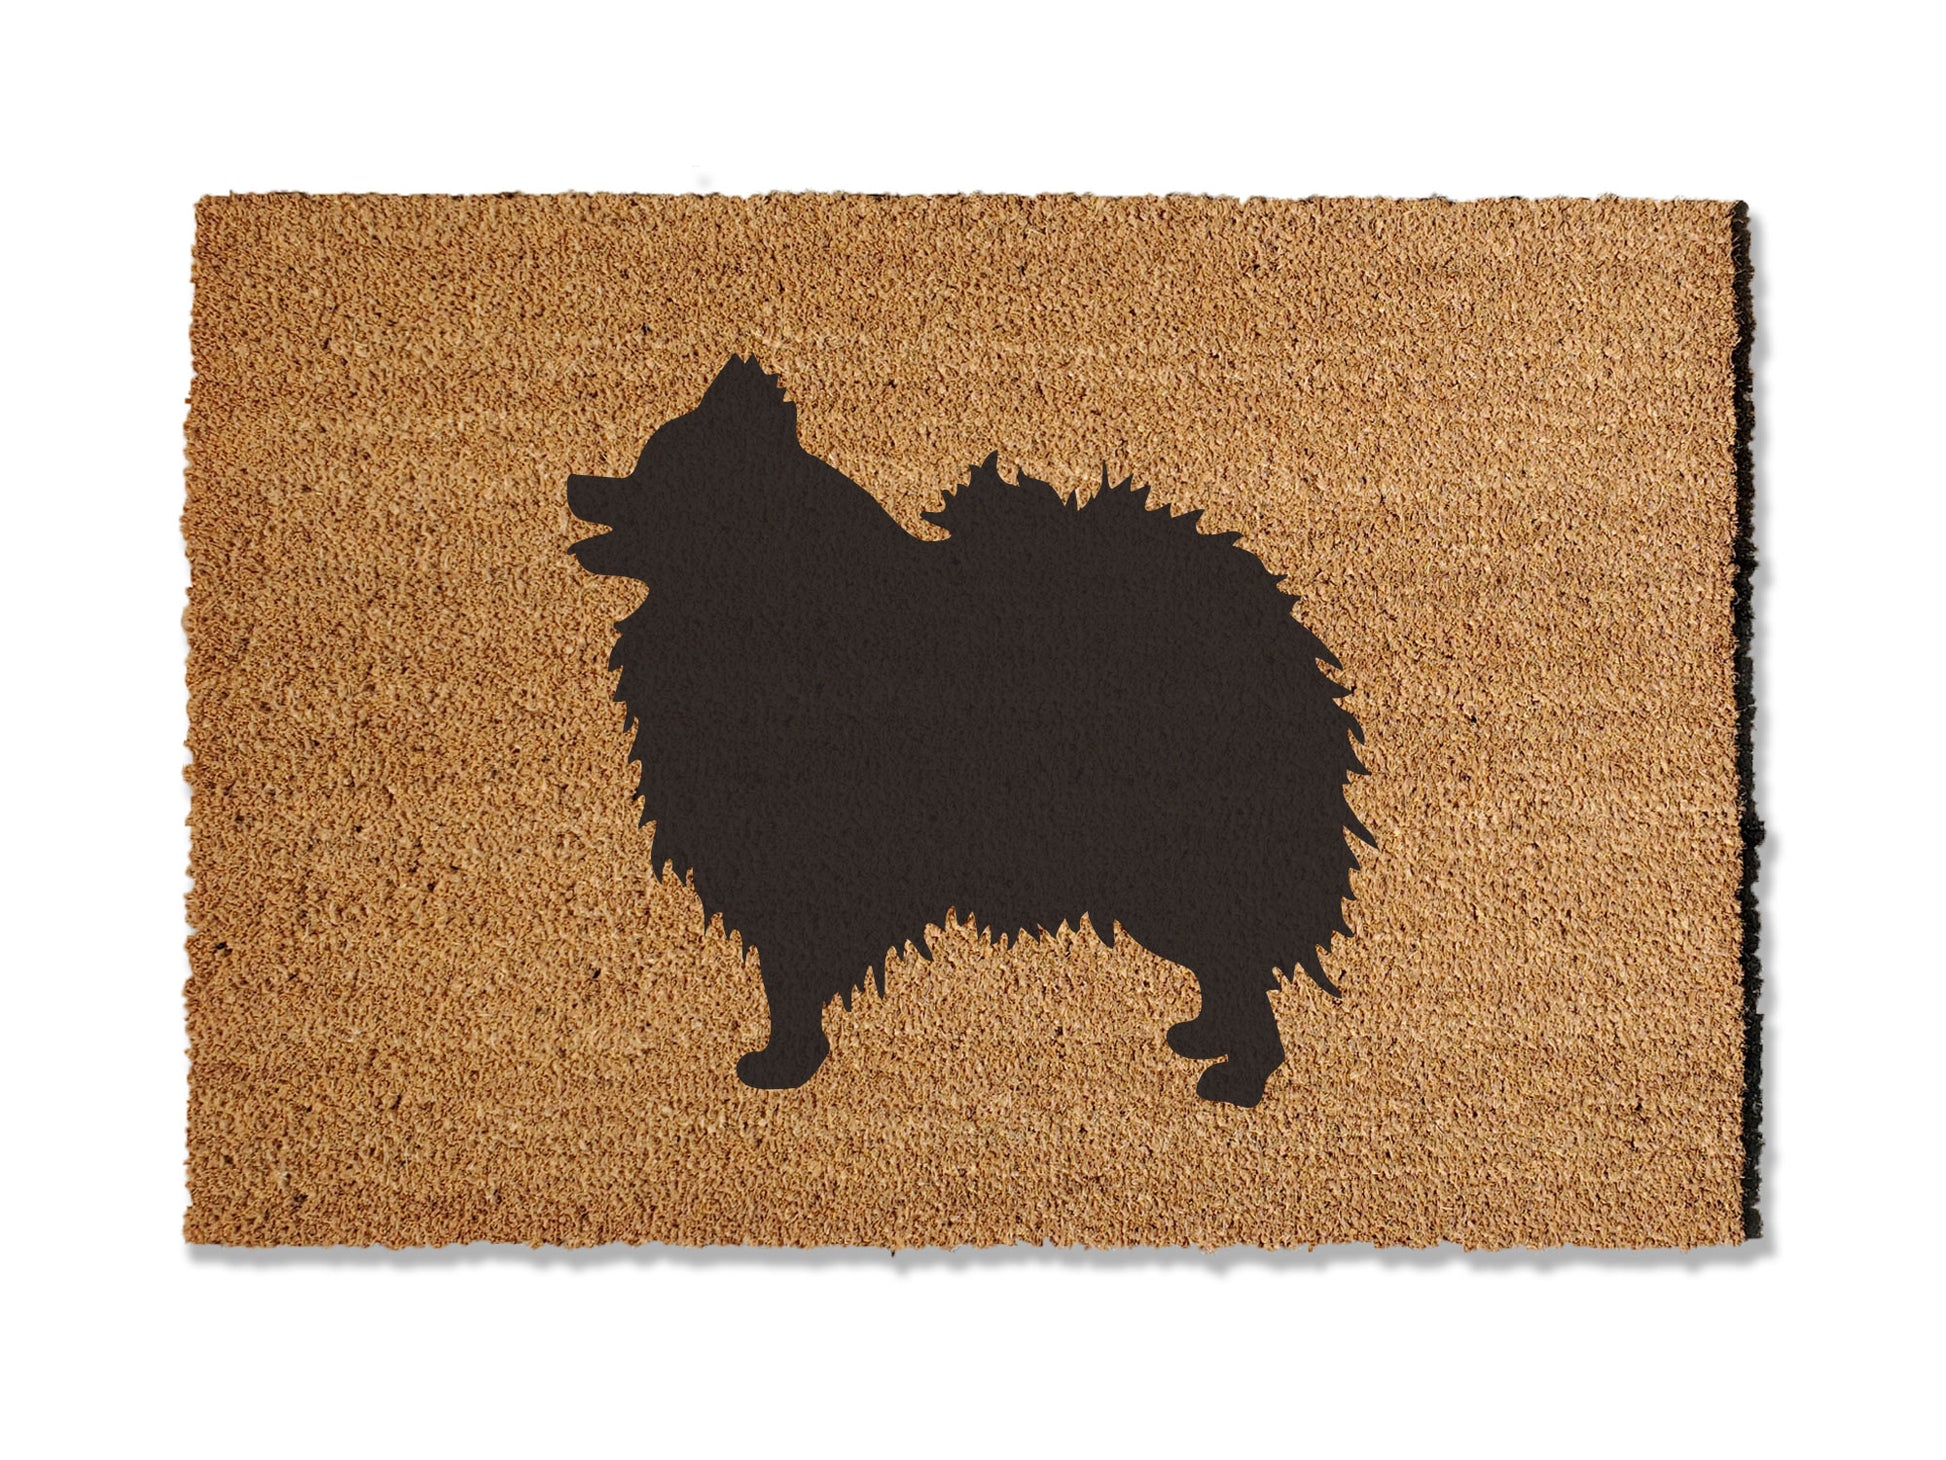 Coir doormat featuring an adorable Pomeranian design, ideal for dog lovers. This doormat is not only charming but also effective at trapping dirt. Available in multiple sizes to suit your entryway needs.